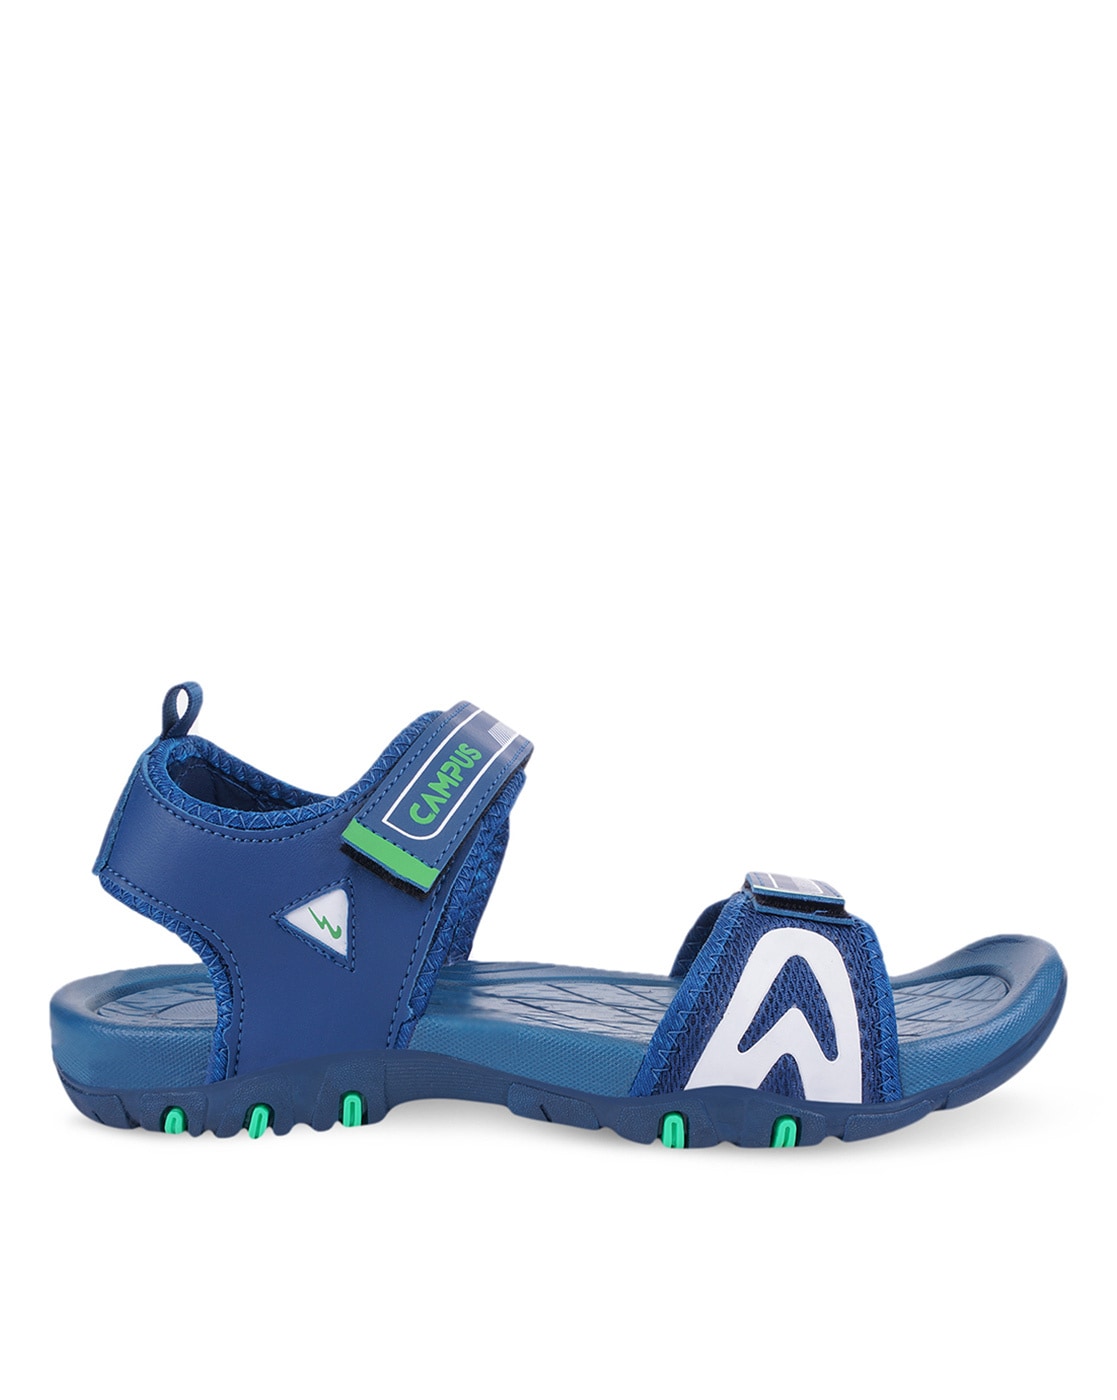 Buy Sandals For Men: Sd-64-Navy-R-Slate | Campus Shoes